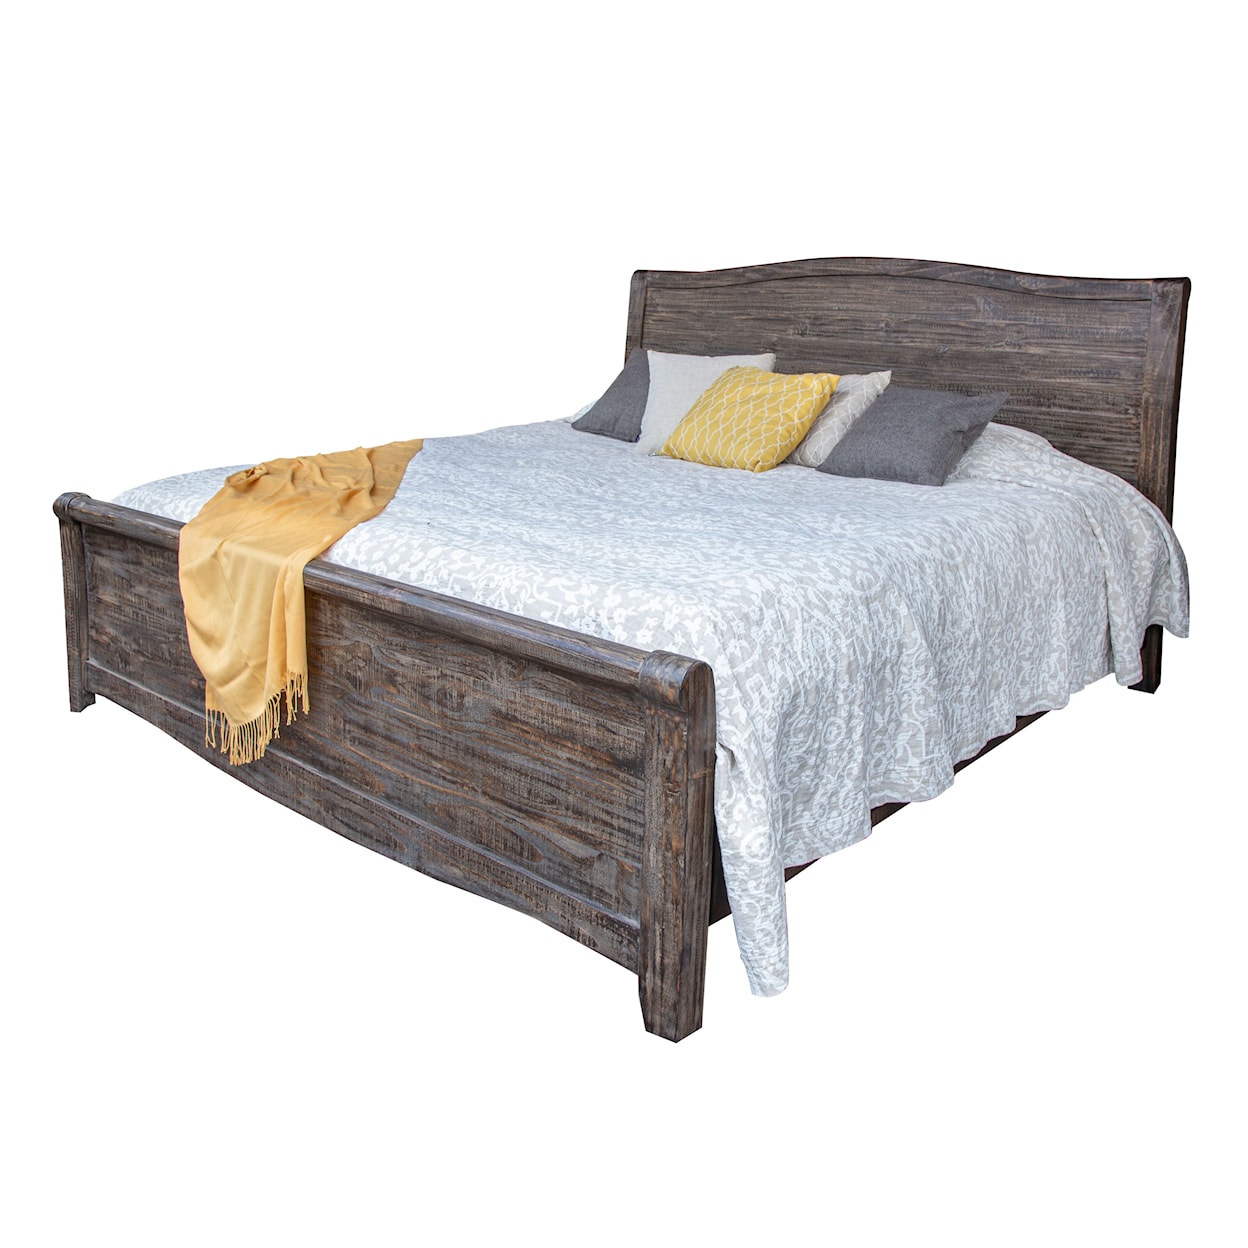 International Furniture Direct Nogales Bedroom Collection Queen Bed